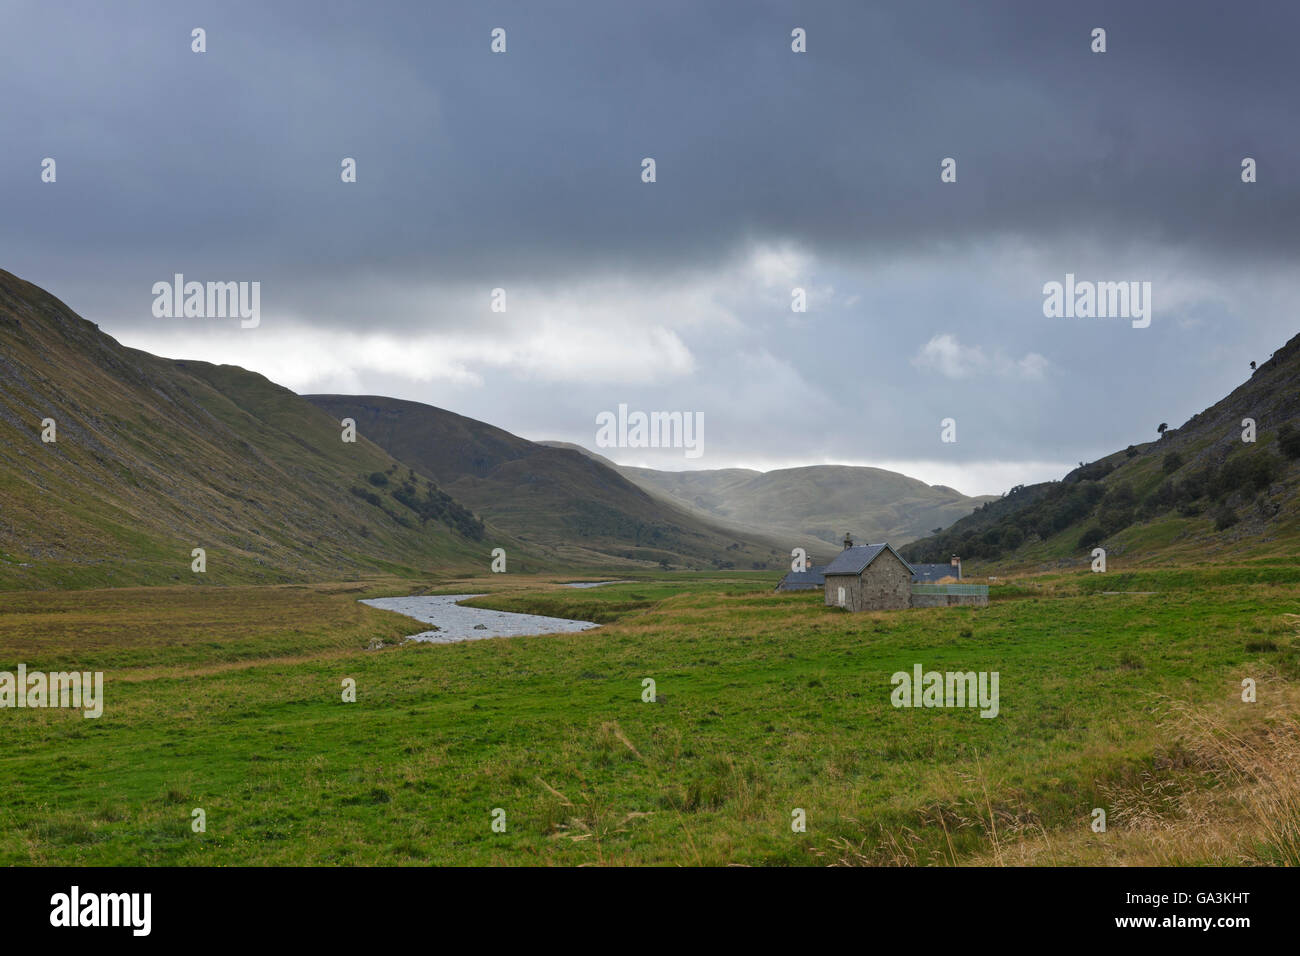 View up the Findhorn valley as a frequent heavy shower approaches, Highlands, Scotland, United Kingdom, Europe Stock Photo